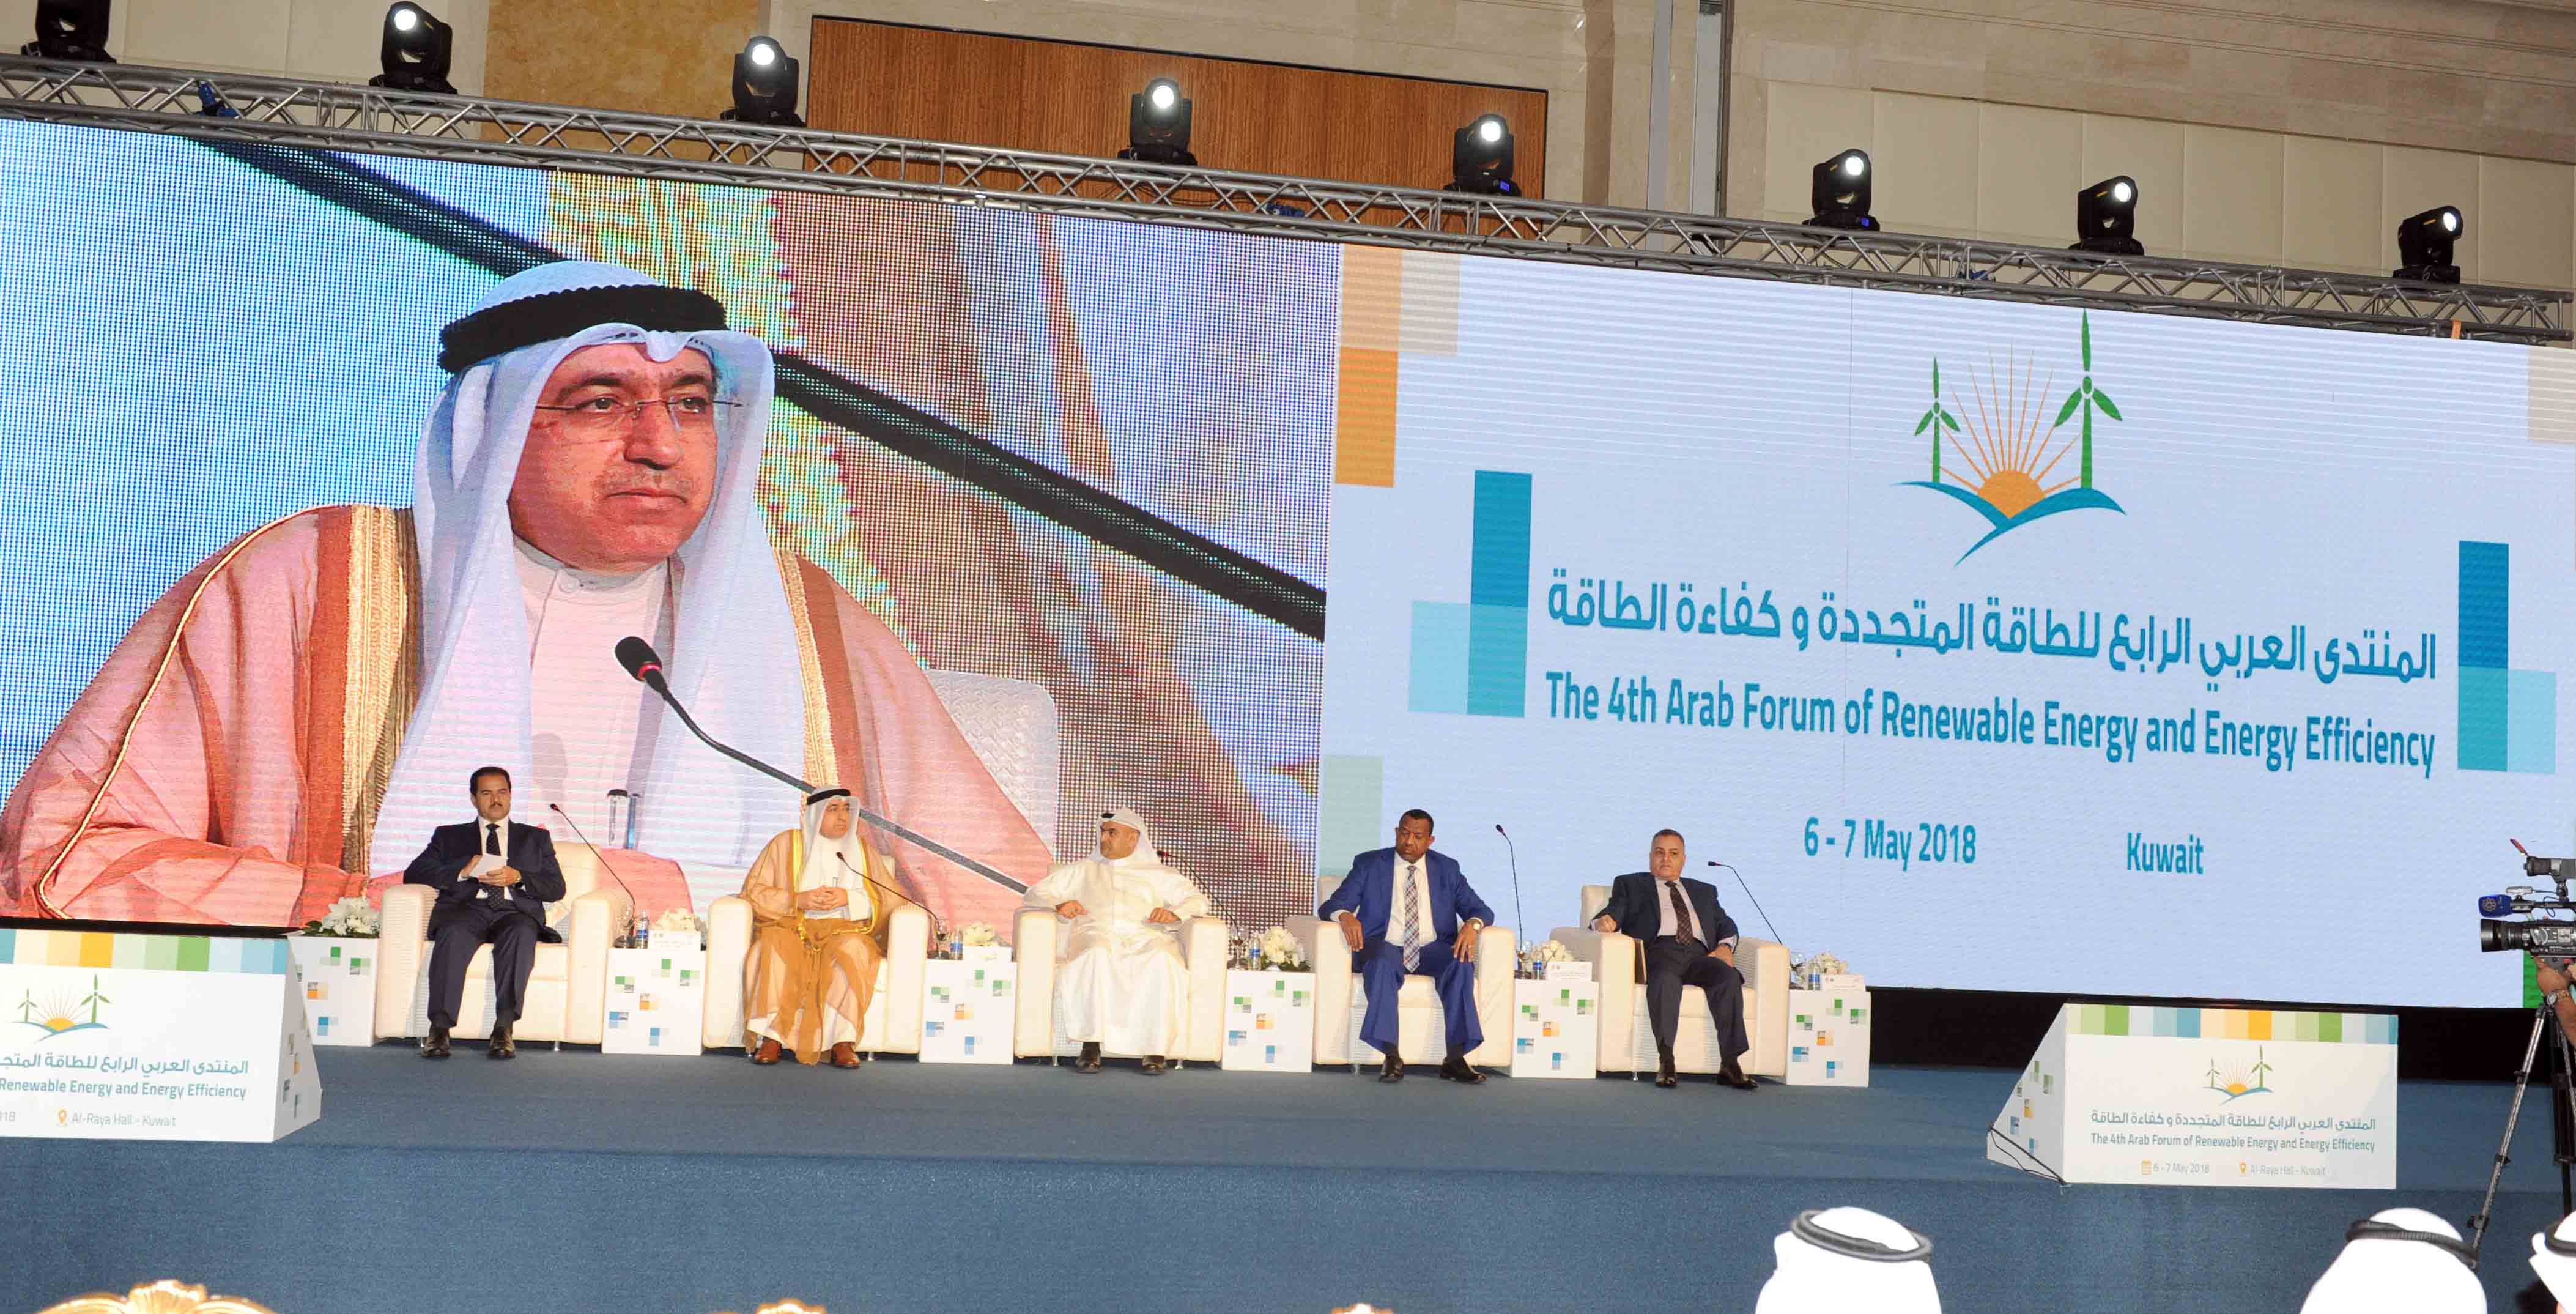 The opening session of the Fourth Arab Forum for Renewable Energy and Energy Efficiency